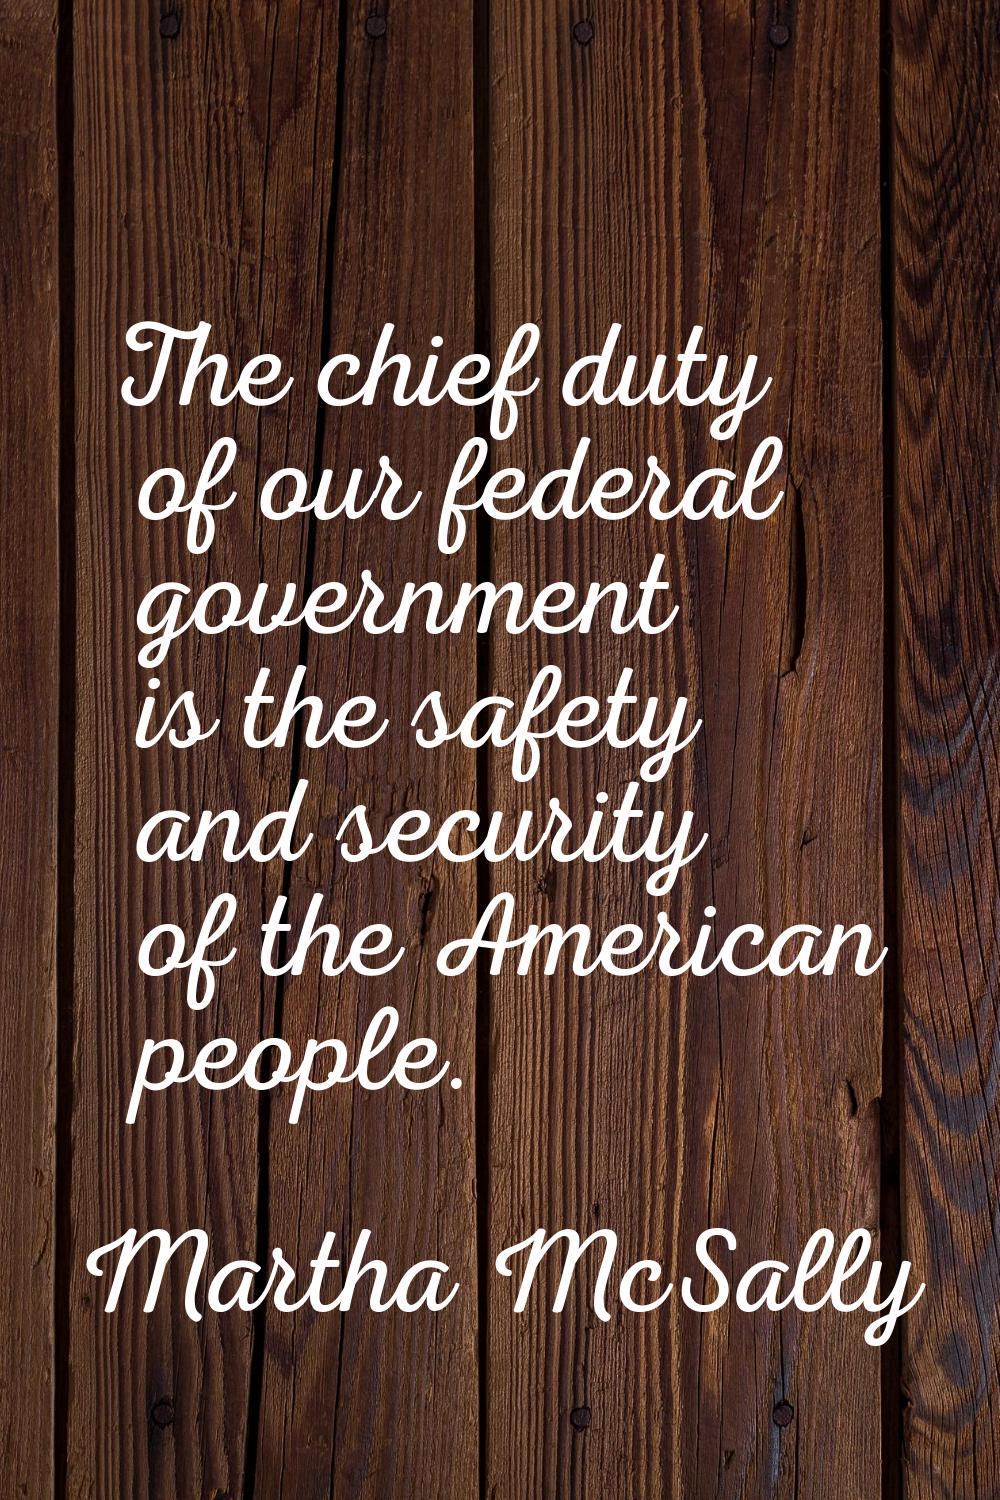 The chief duty of our federal government is the safety and security of the American people.